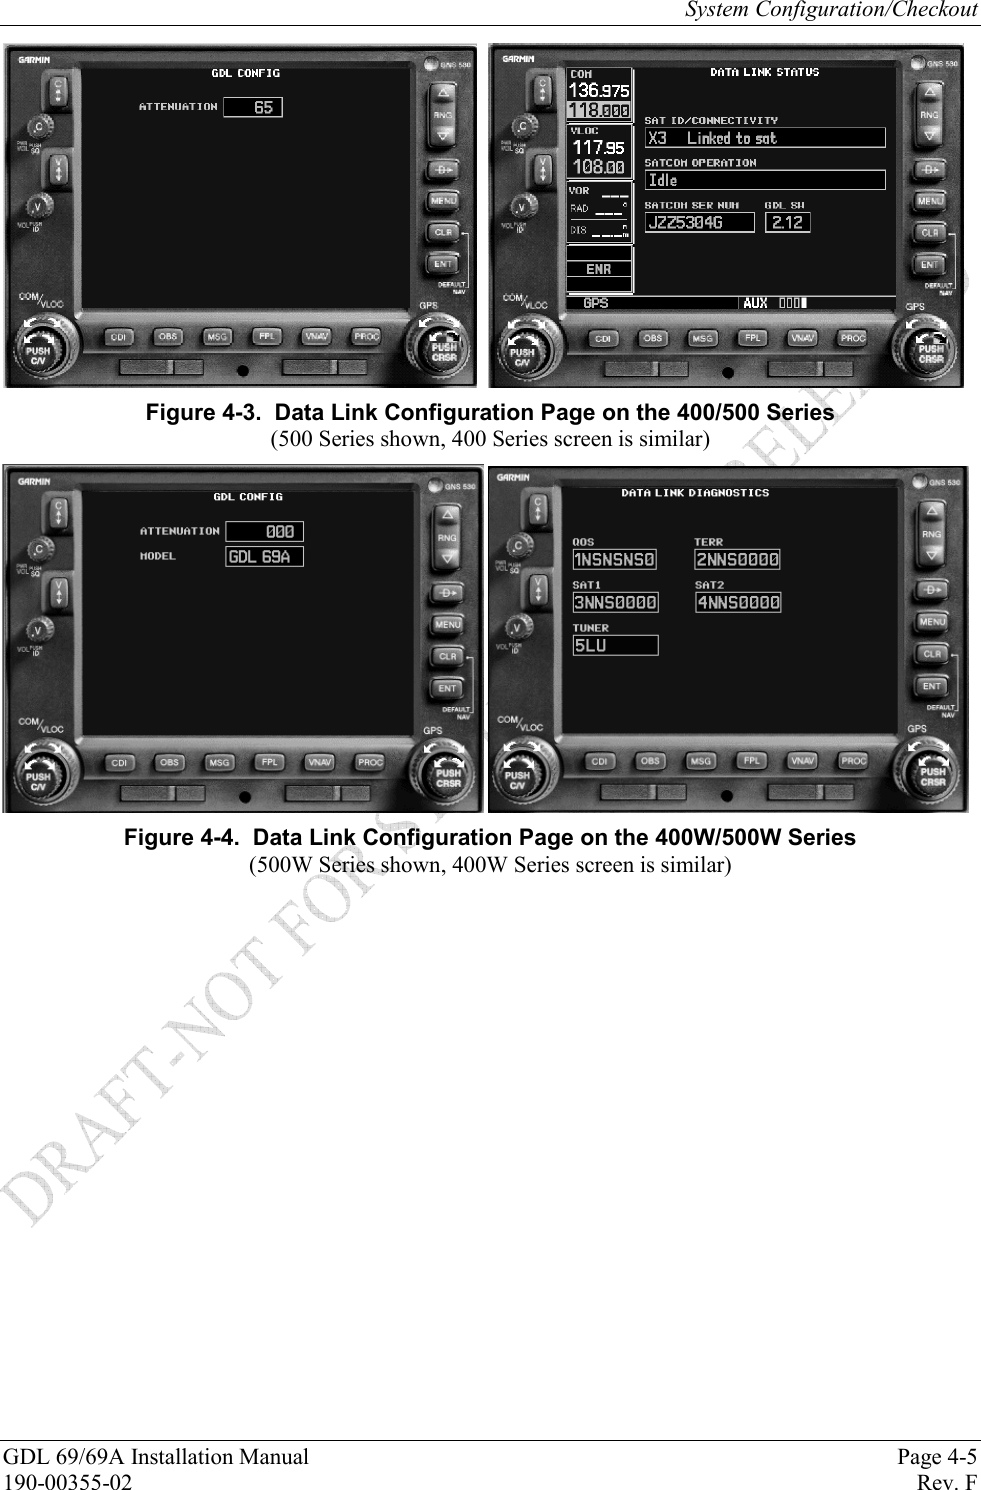 System Configuration/Checkout GDL 69/69A Installation Manual  Page 4-5 190-00355-02   Rev. F     Figure 4-3.  Data Link Configuration Page on the 400/500 Series (500 Series shown, 400 Series screen is similar)    Figure 4-4.  Data Link Configuration Page on the 400W/500W Series (500W Series shown, 400W Series screen is similar) 